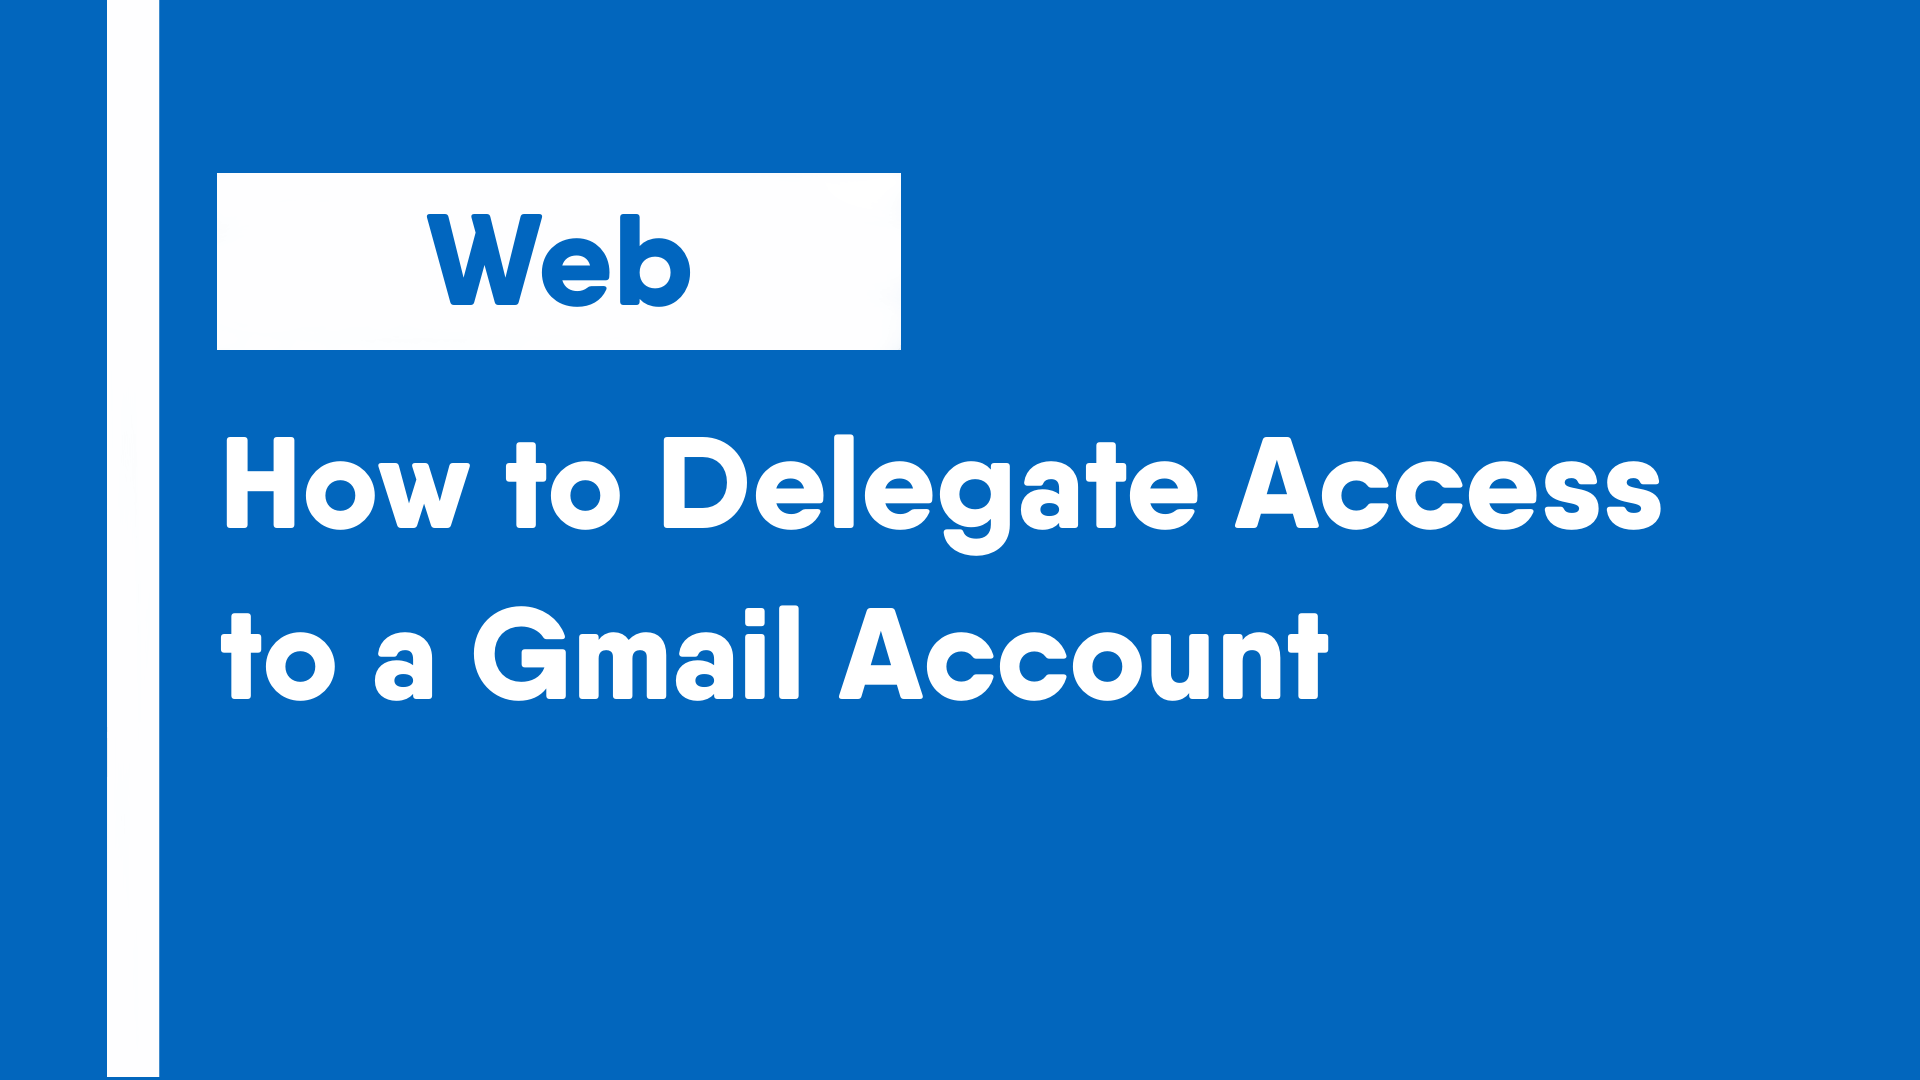 How to Delegate Access to a Gmail Account